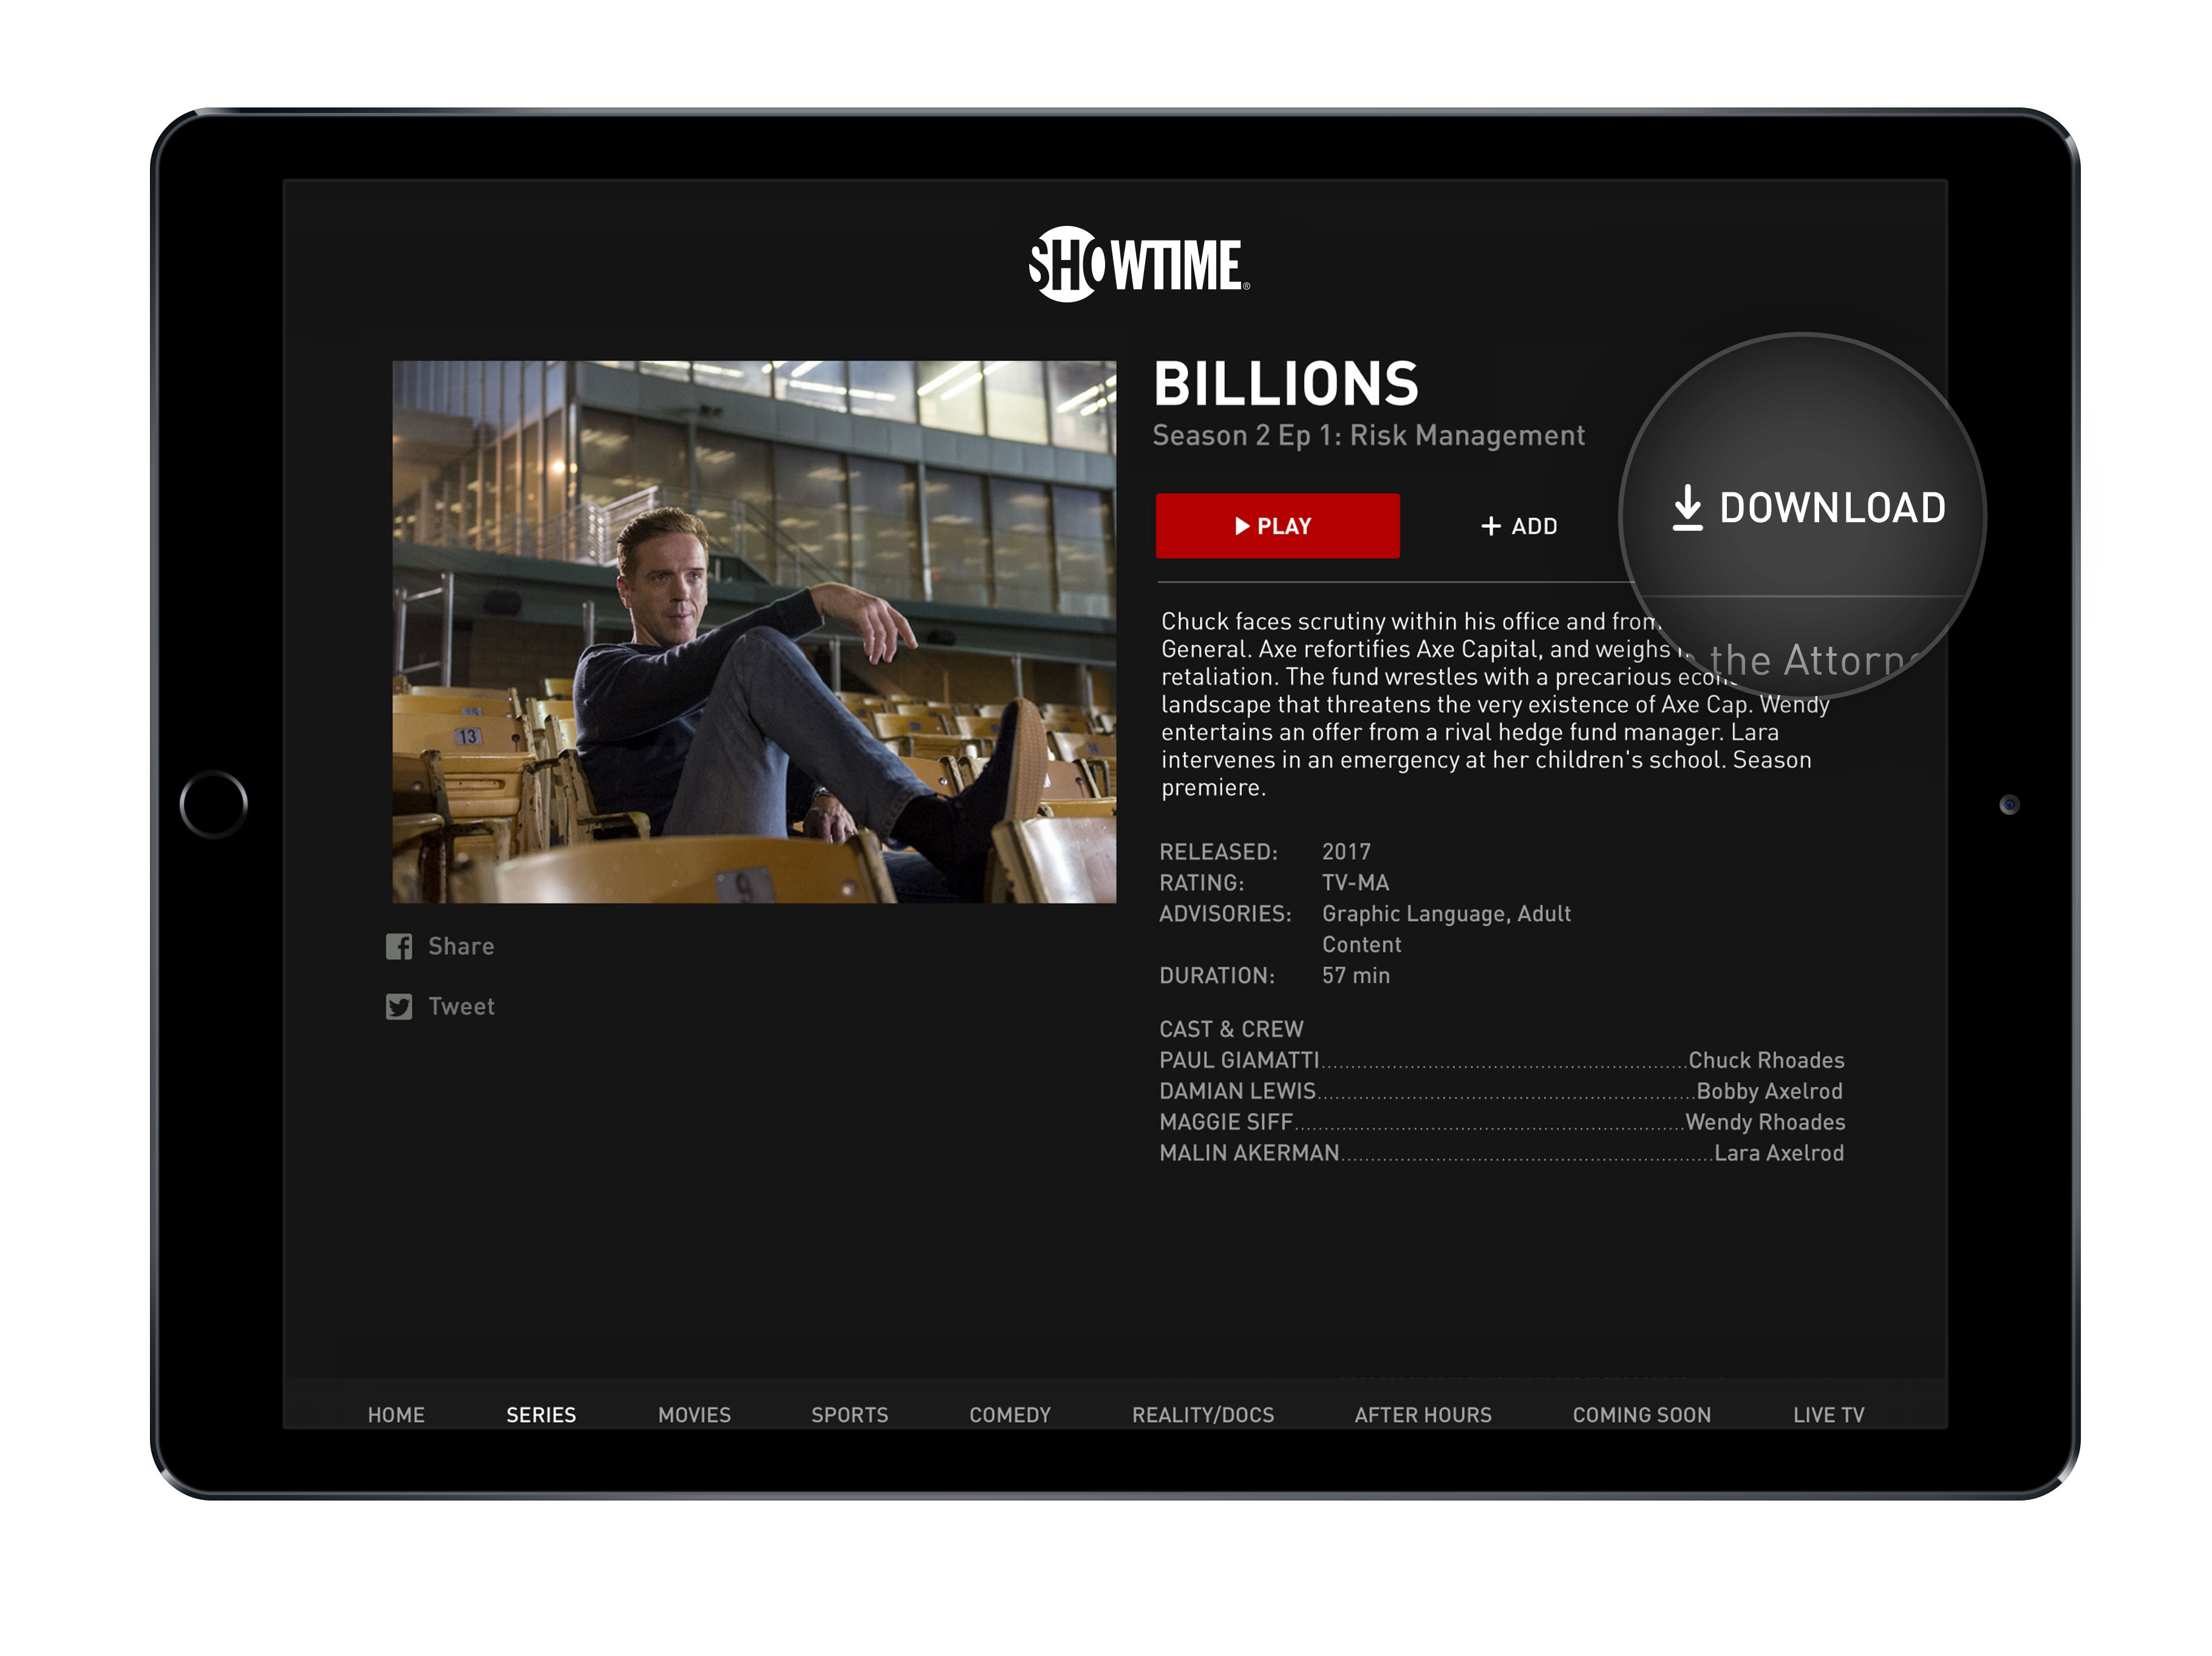 Showtime's streaming apps can download video for offline viewing